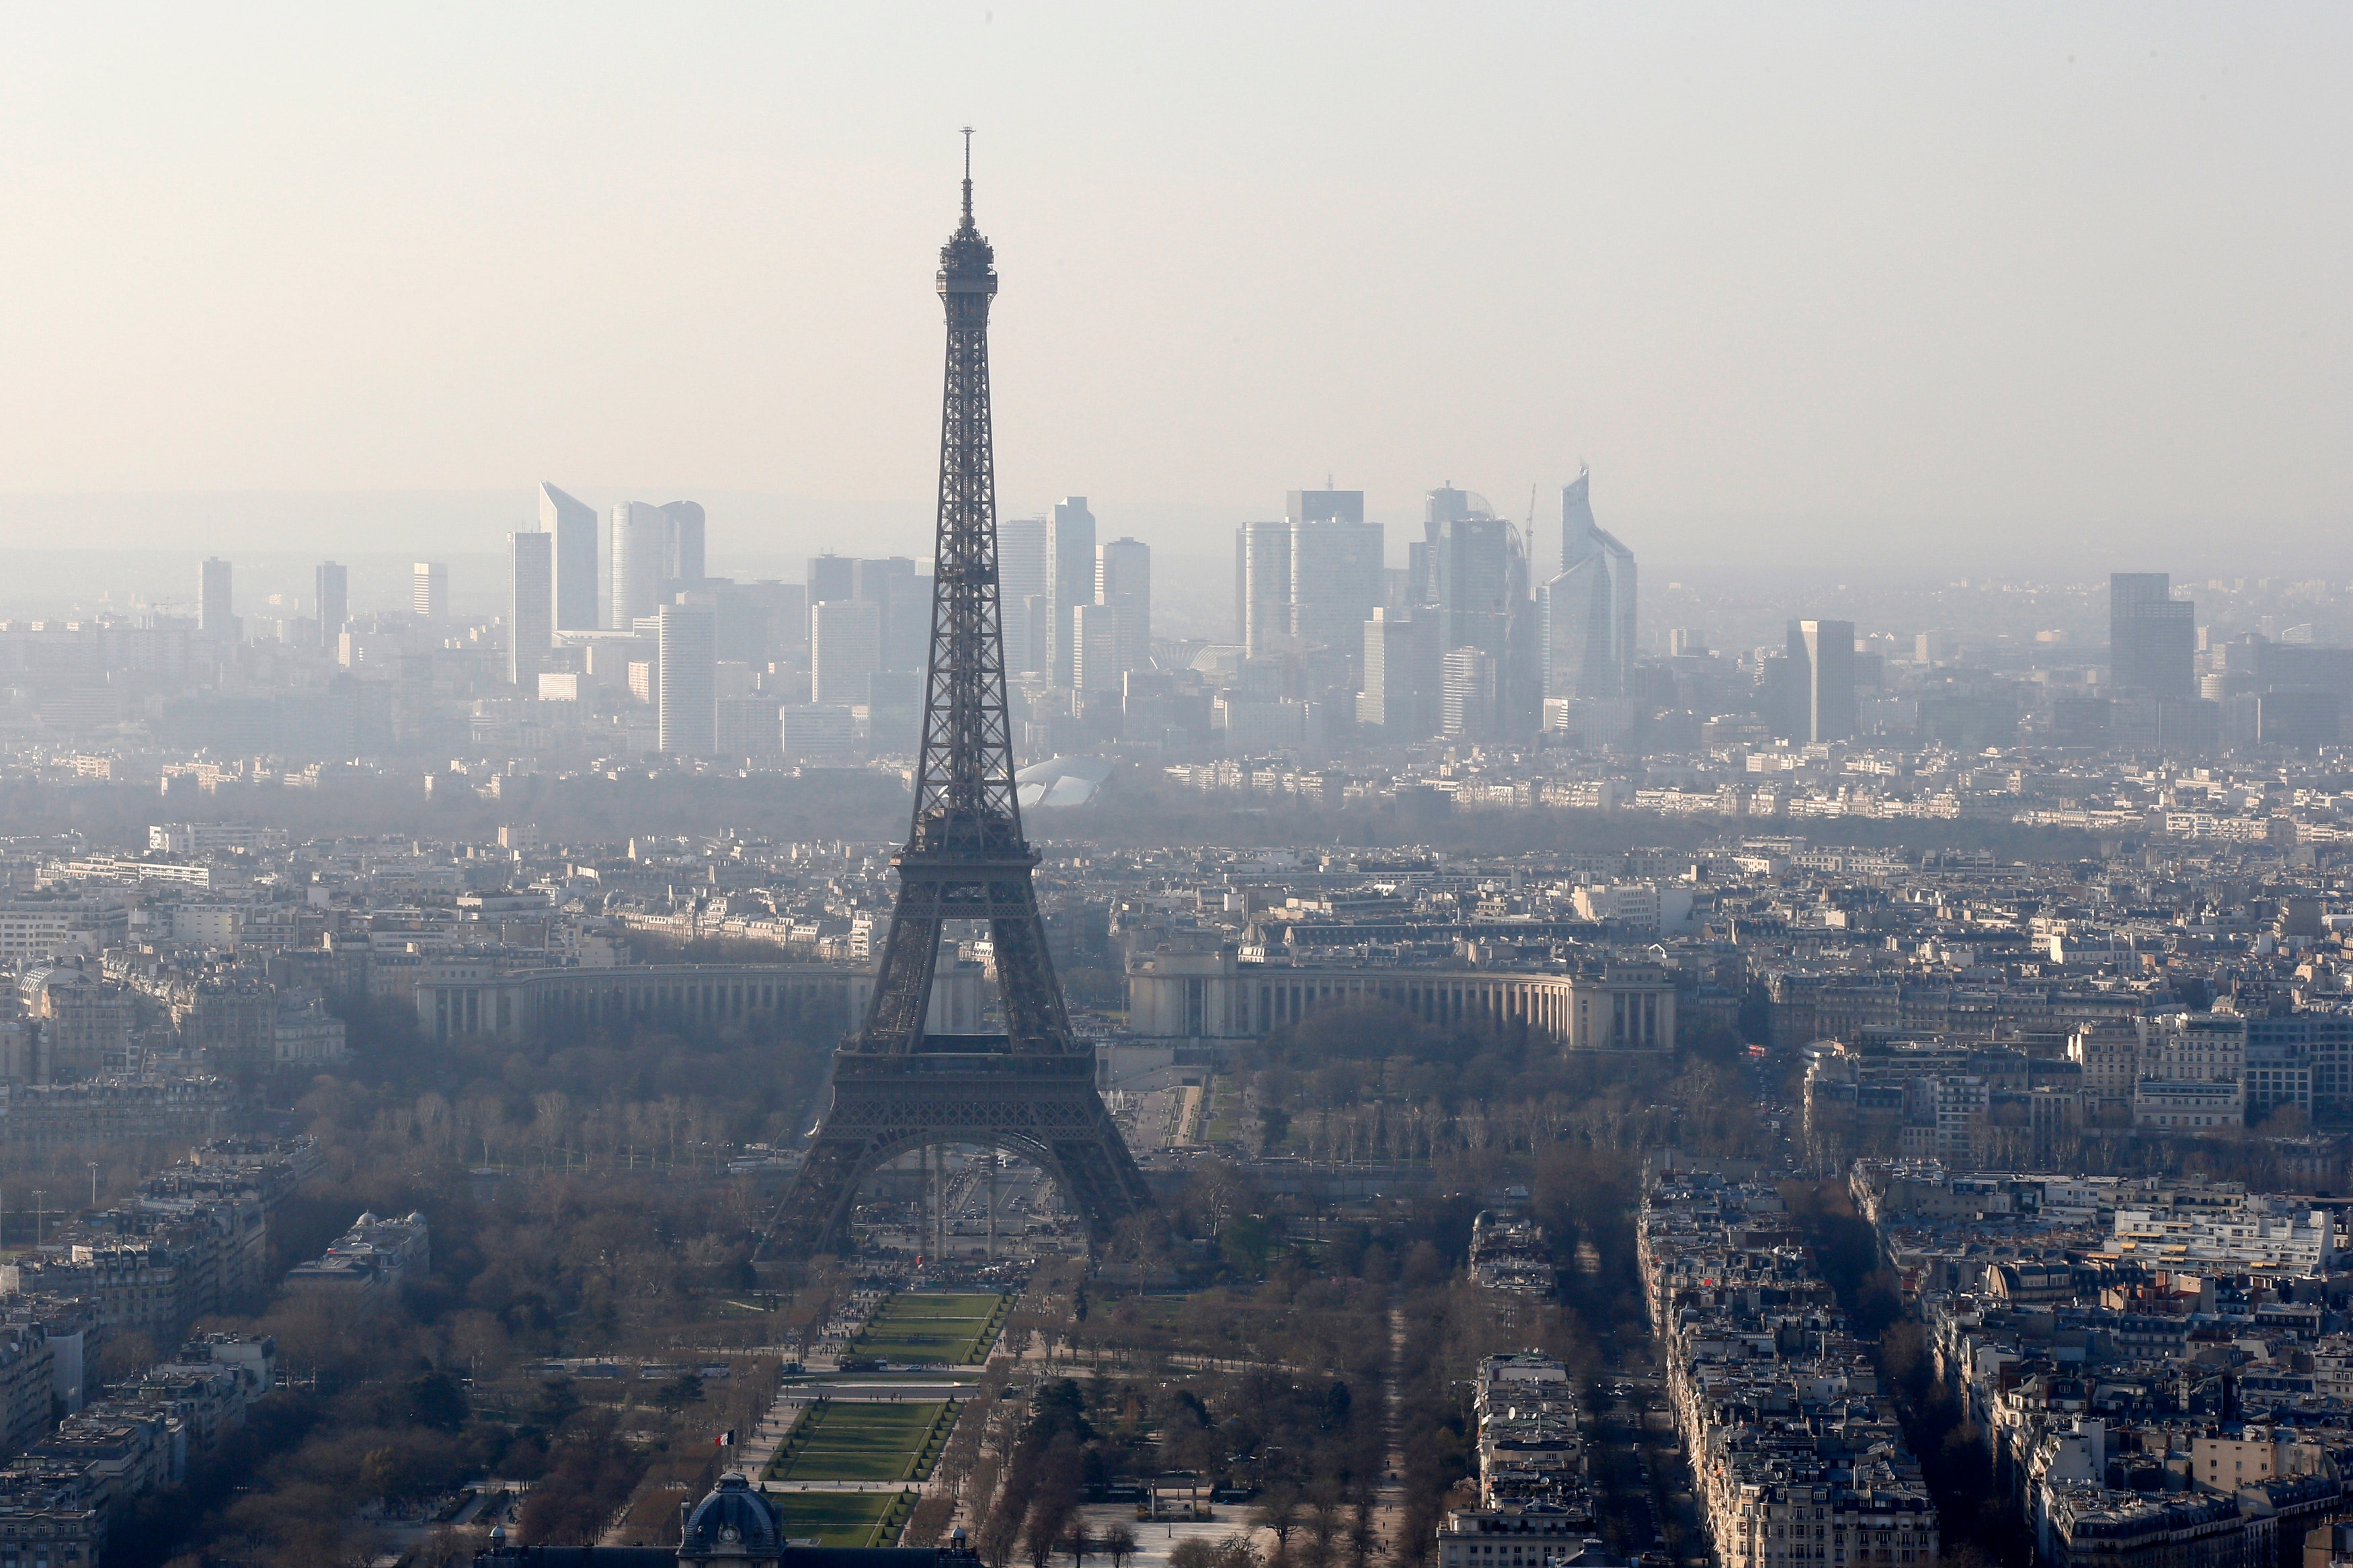 FOX NEWS: Paris shaken by major blast noise caused by fighter jet breaking sound barrier September 30, 2020 at 04:37PM